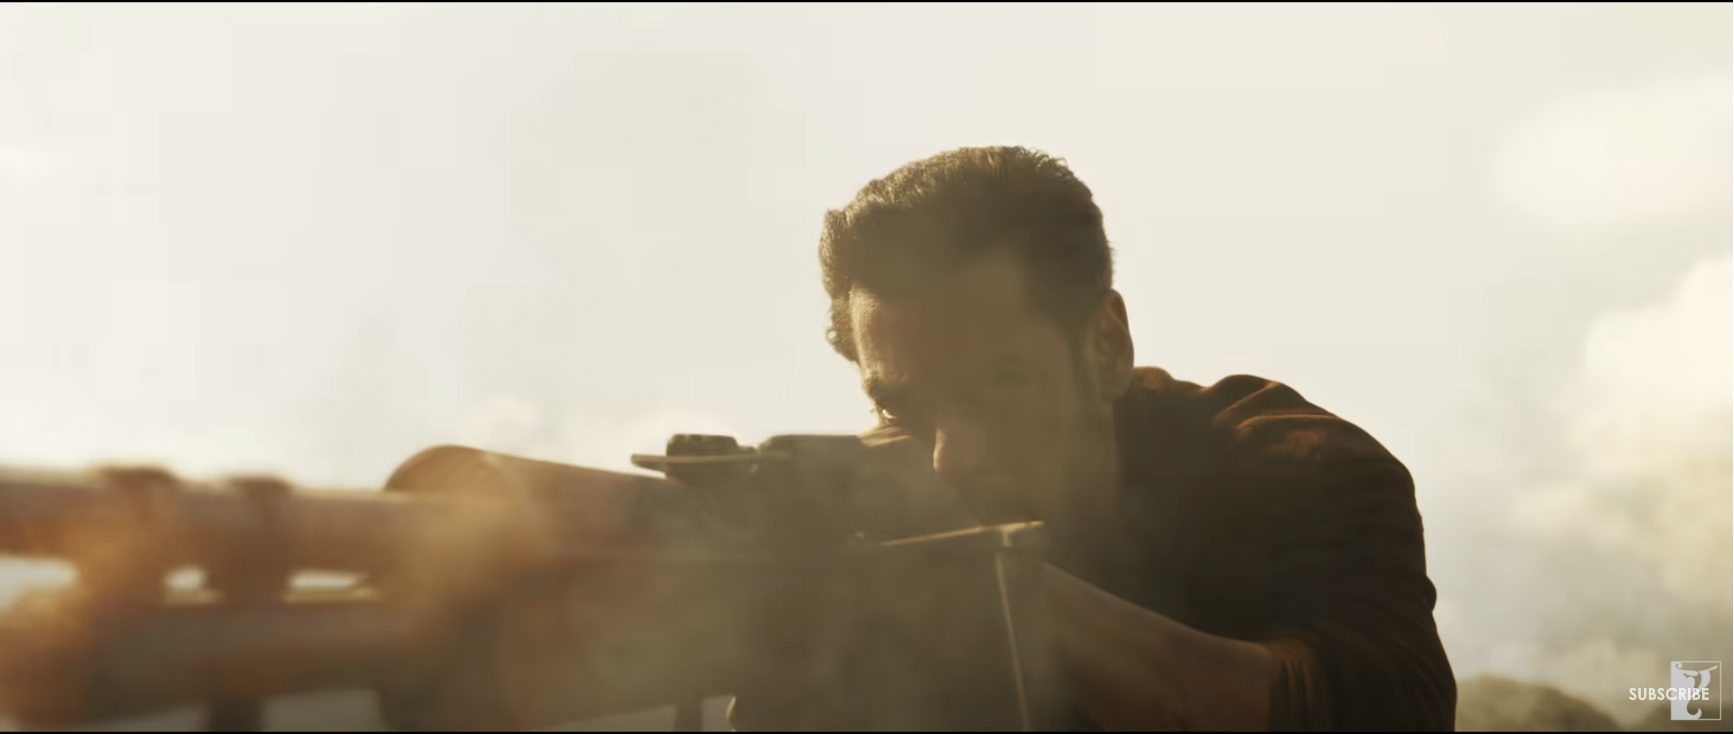 Salman Khan’s Tiger 3  Trailer is out